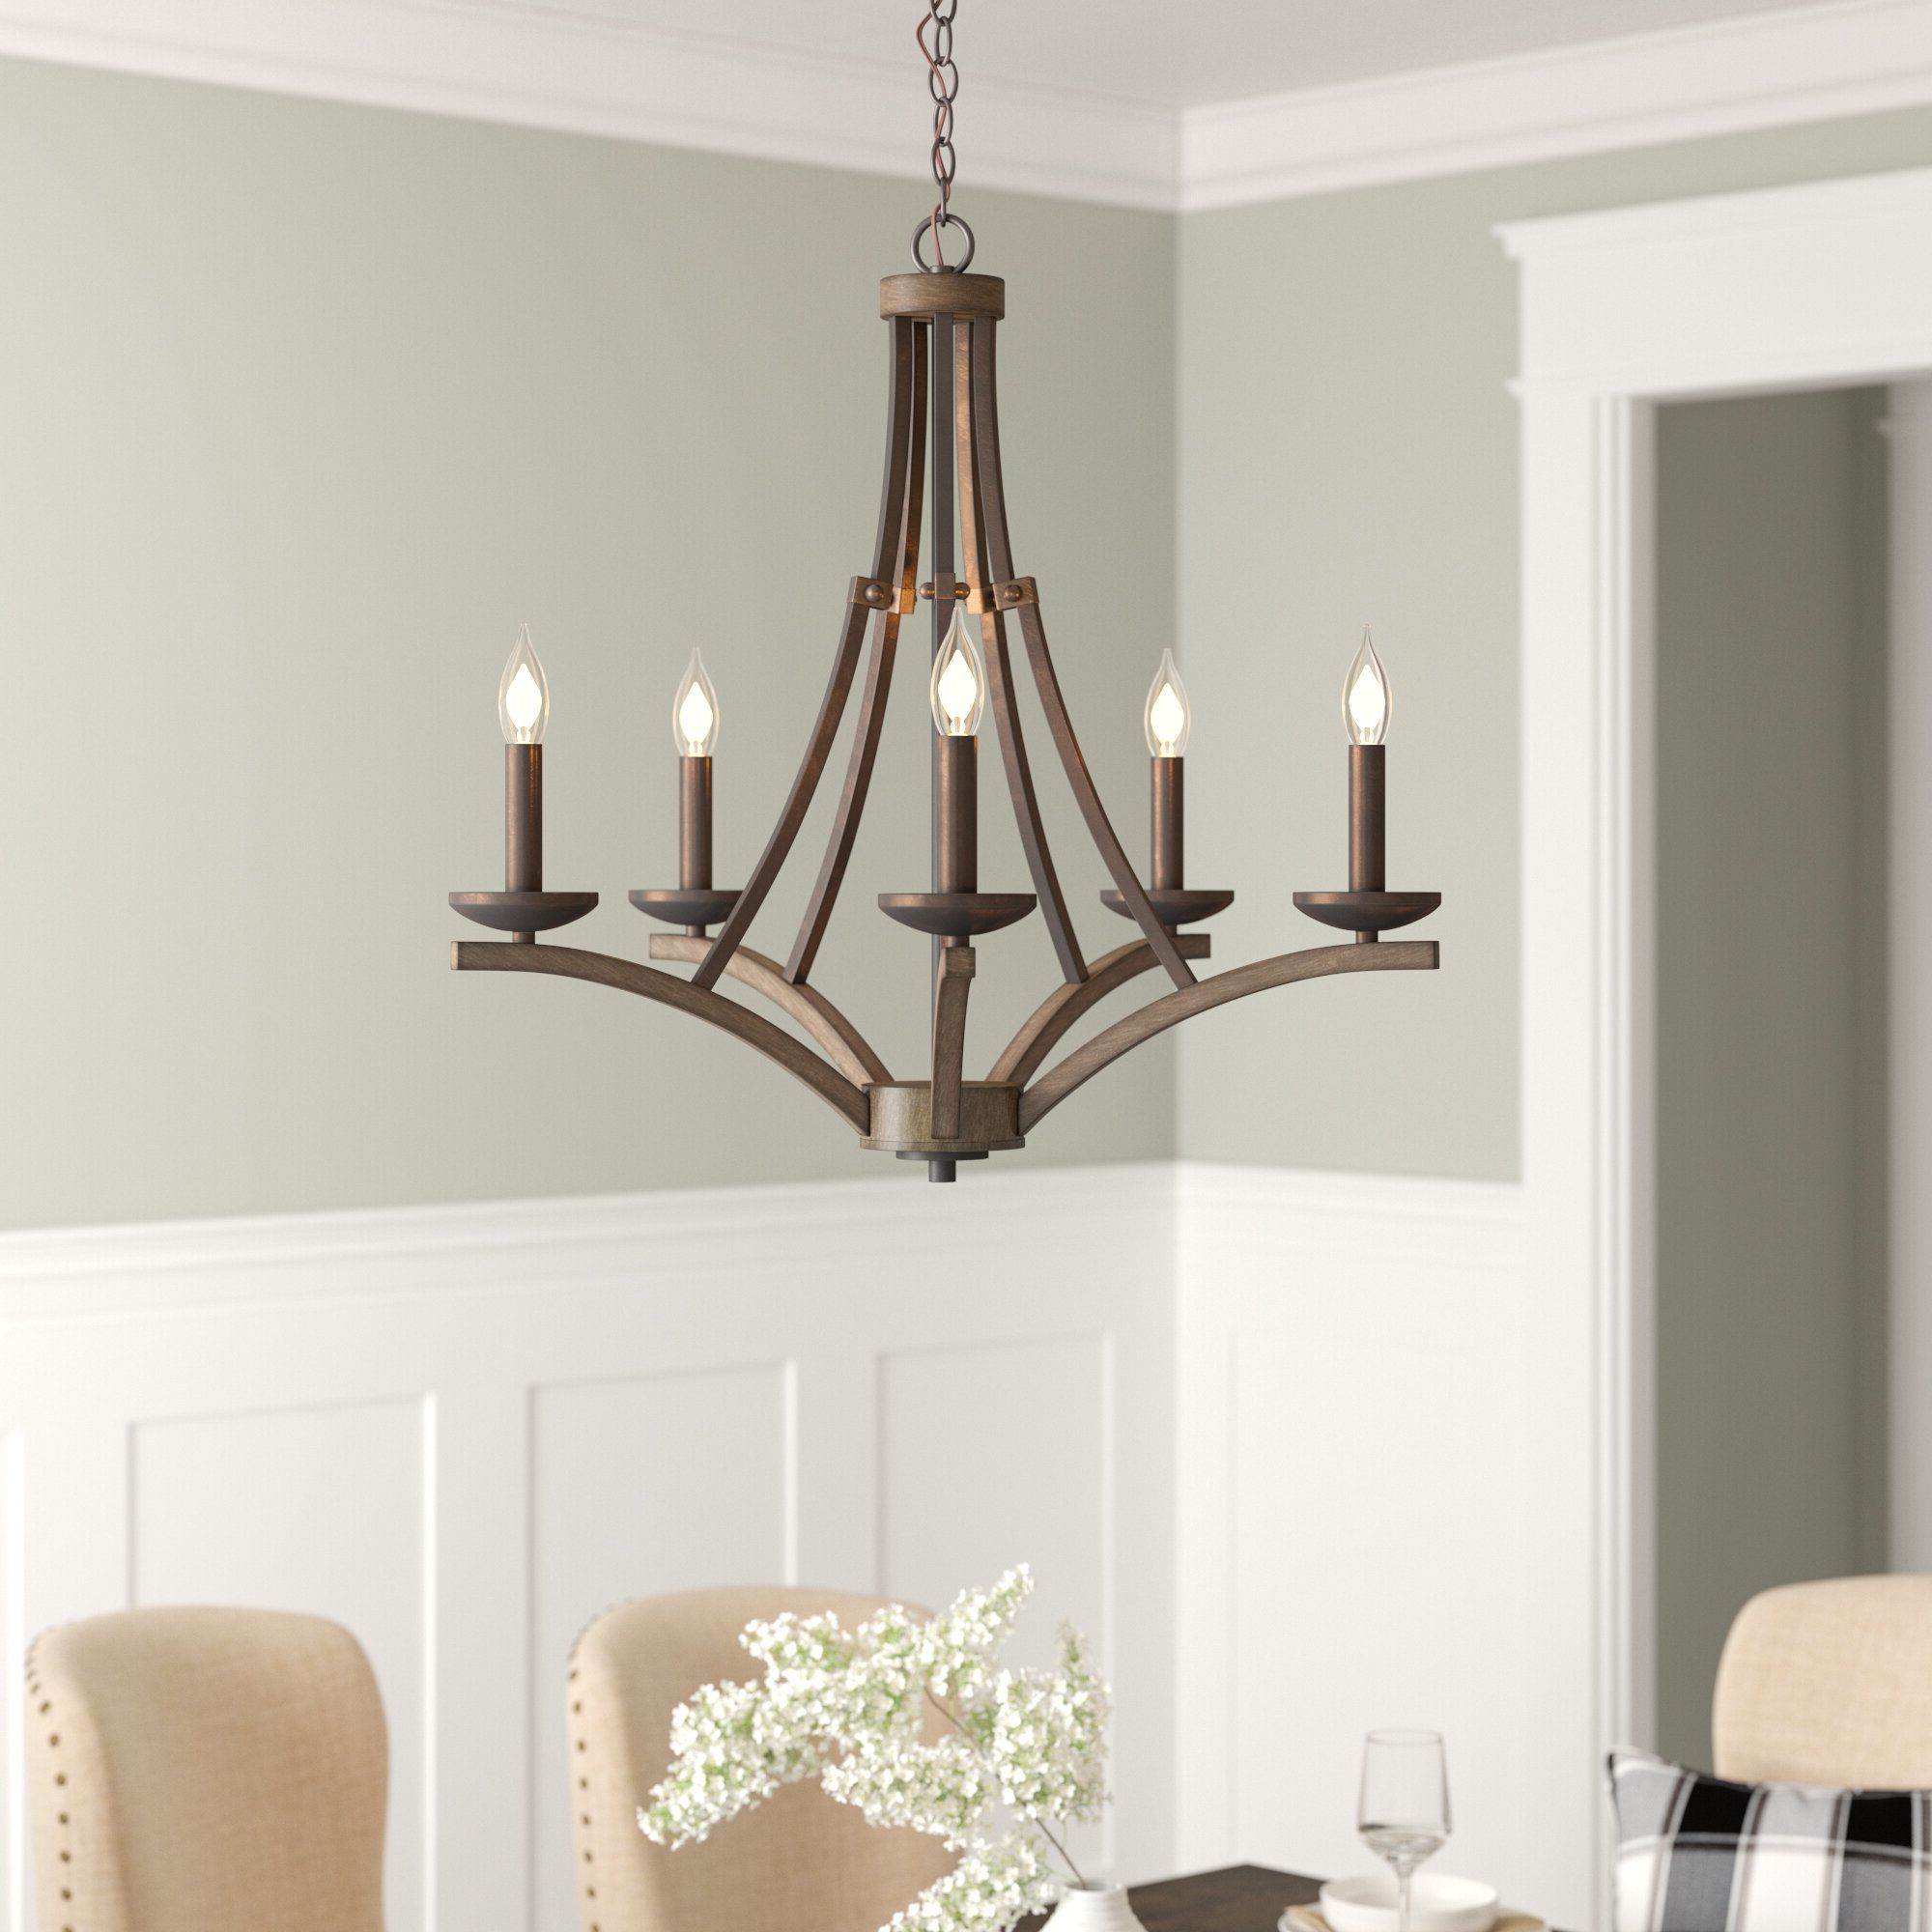 Famous Berger 5 Light Candle Style Chandeliers Throughout Wireman 5 Light Candle Style Chandelier (View 6 of 25)